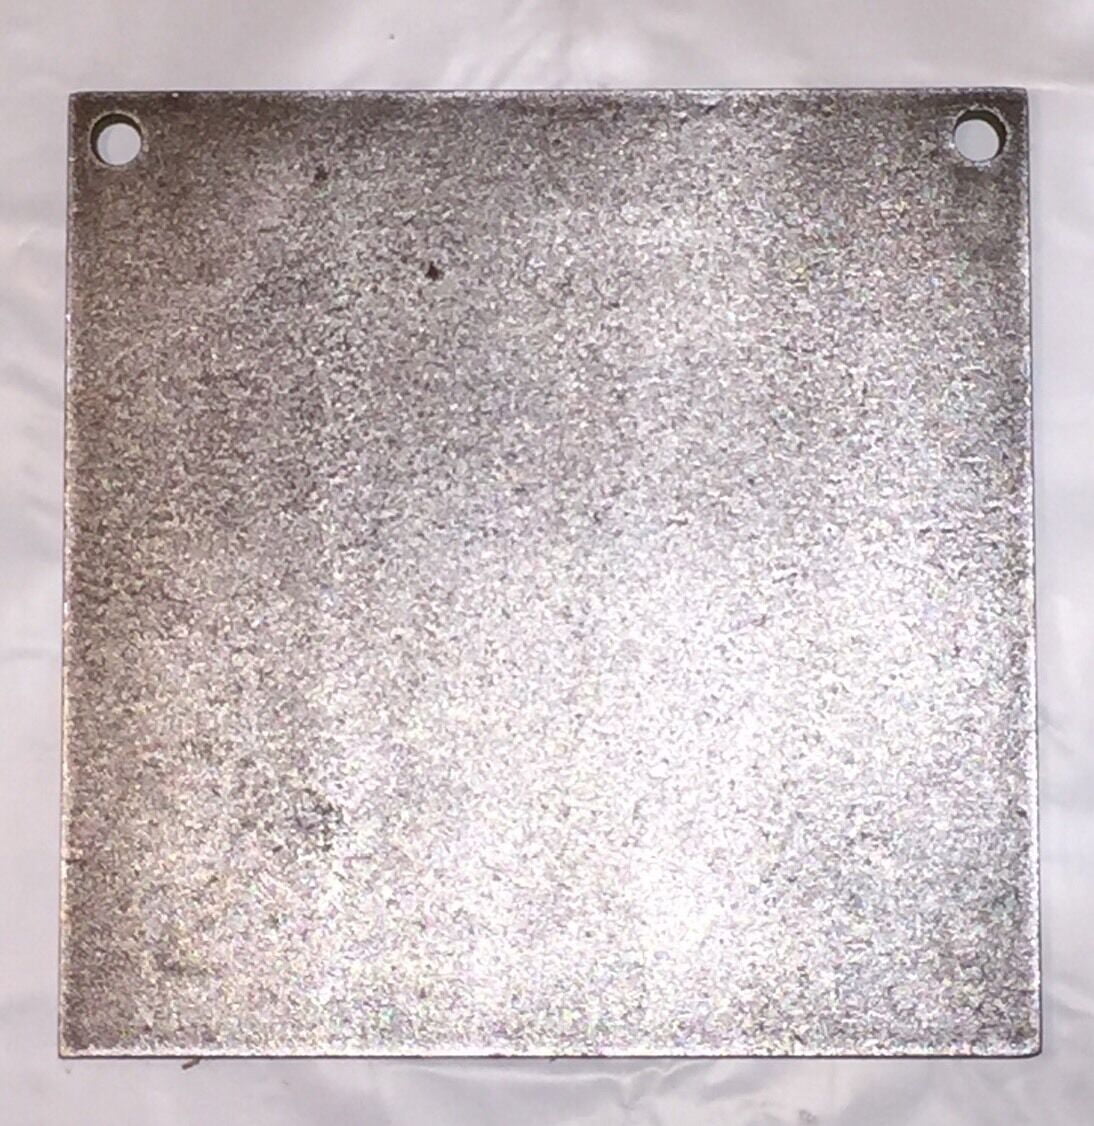 AR500 Steel Target Square Gong 1/2" X 8" 